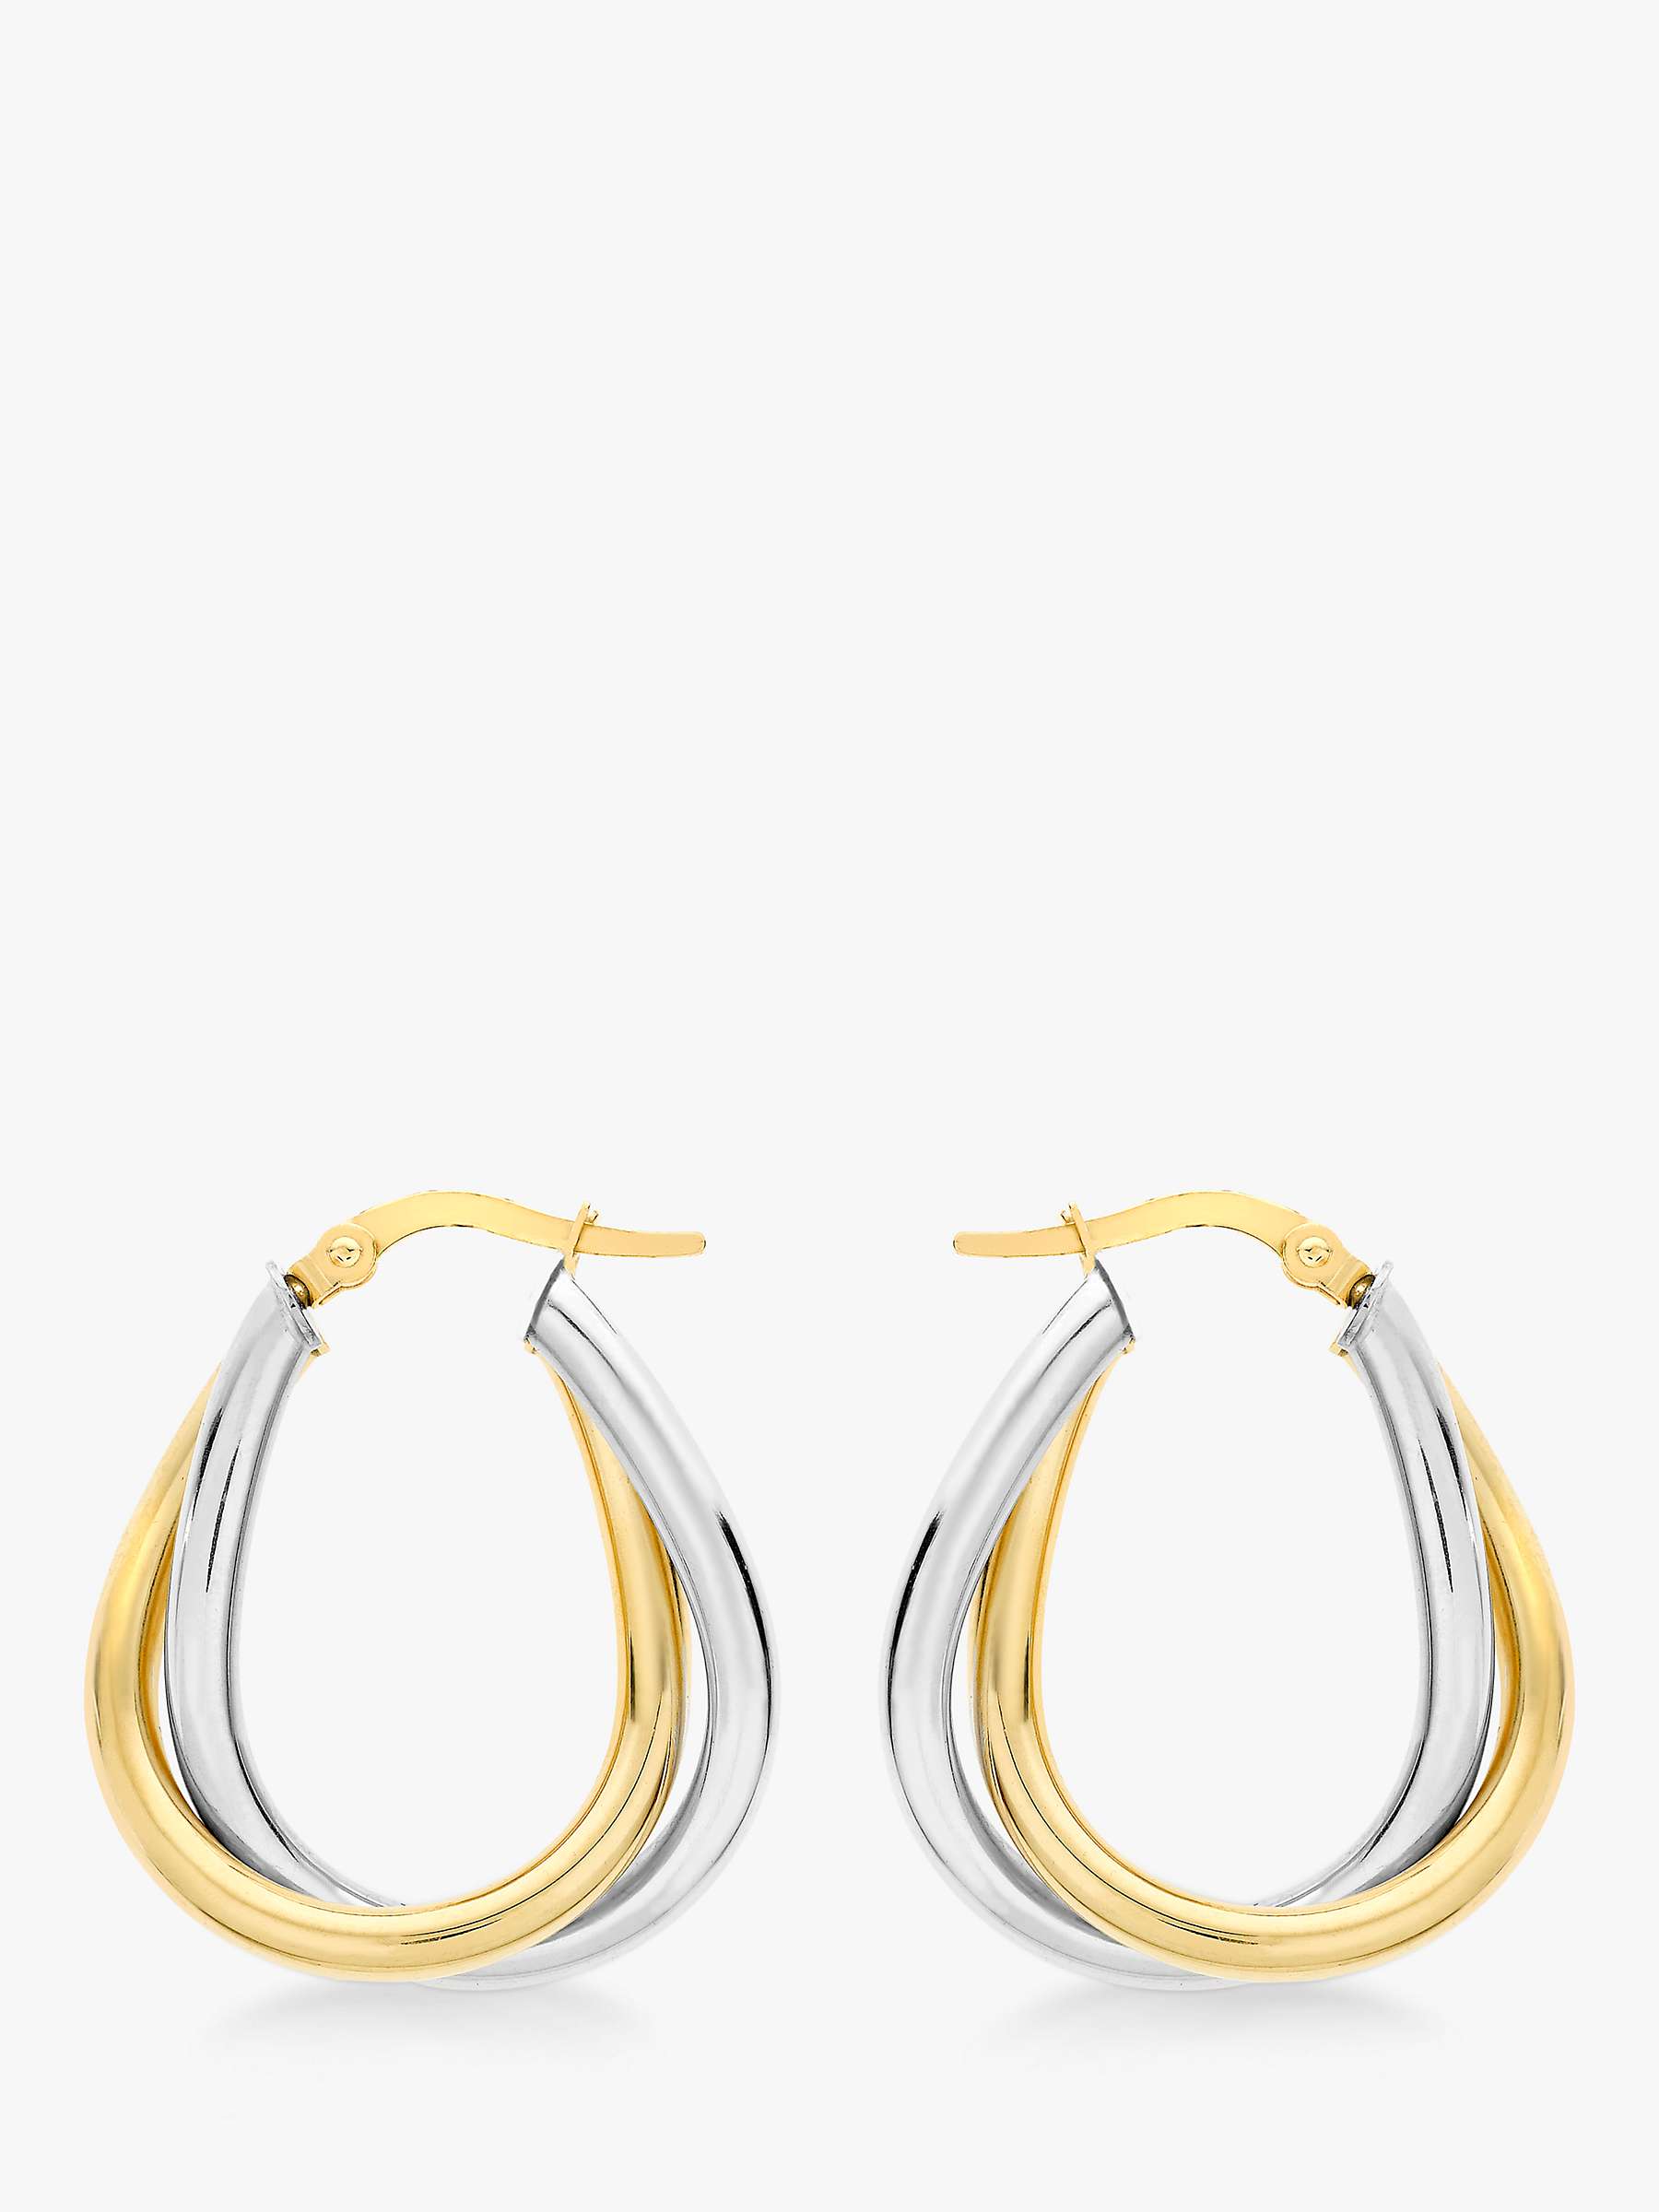 Buy IBB 9ct Gold Two Colour Twined Creole Earrings, White Gold/Gold Online at johnlewis.com